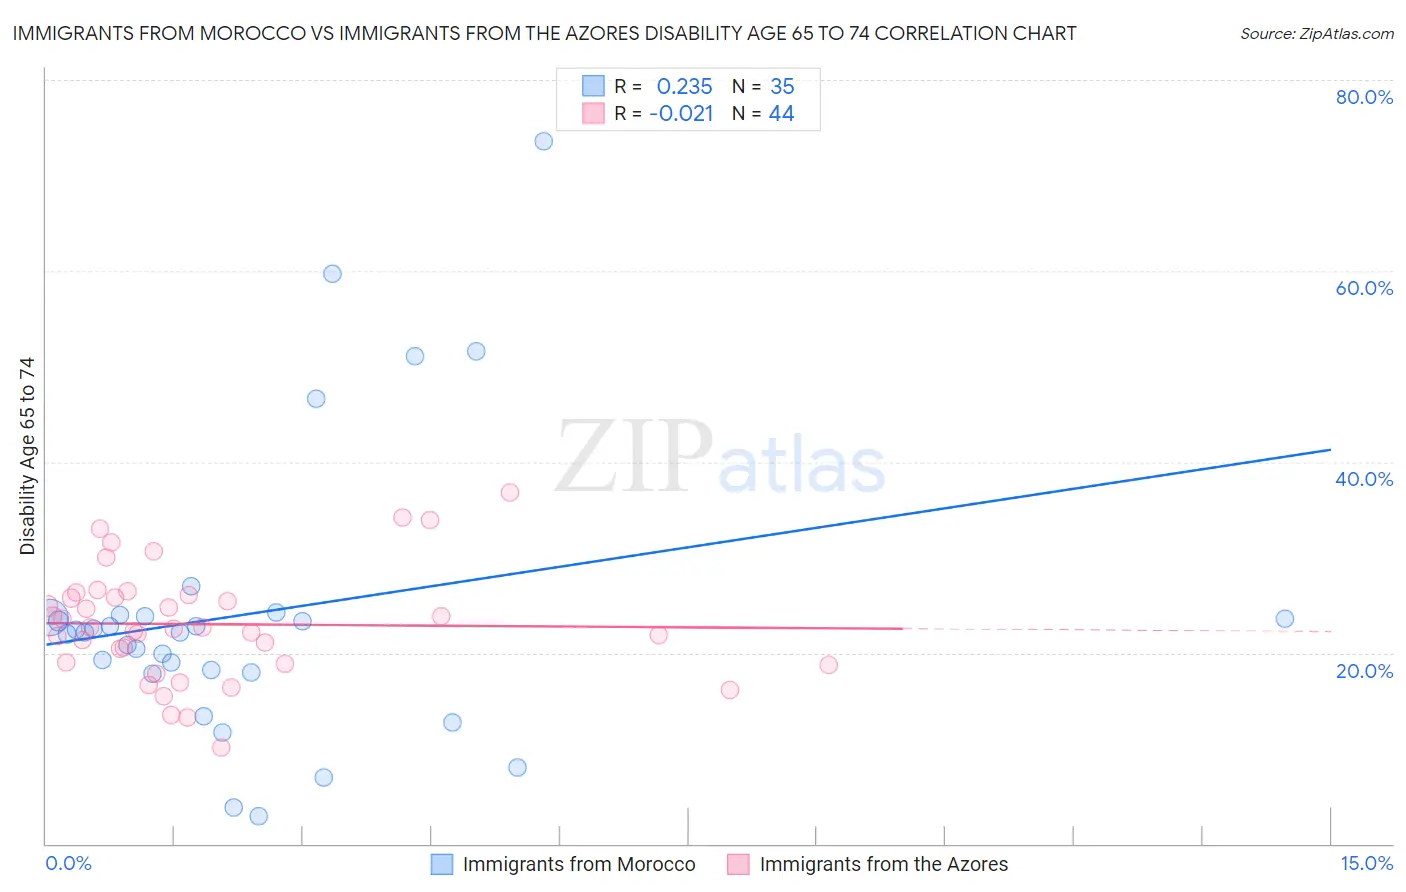 Immigrants from Morocco vs Immigrants from the Azores Disability Age 65 to 74